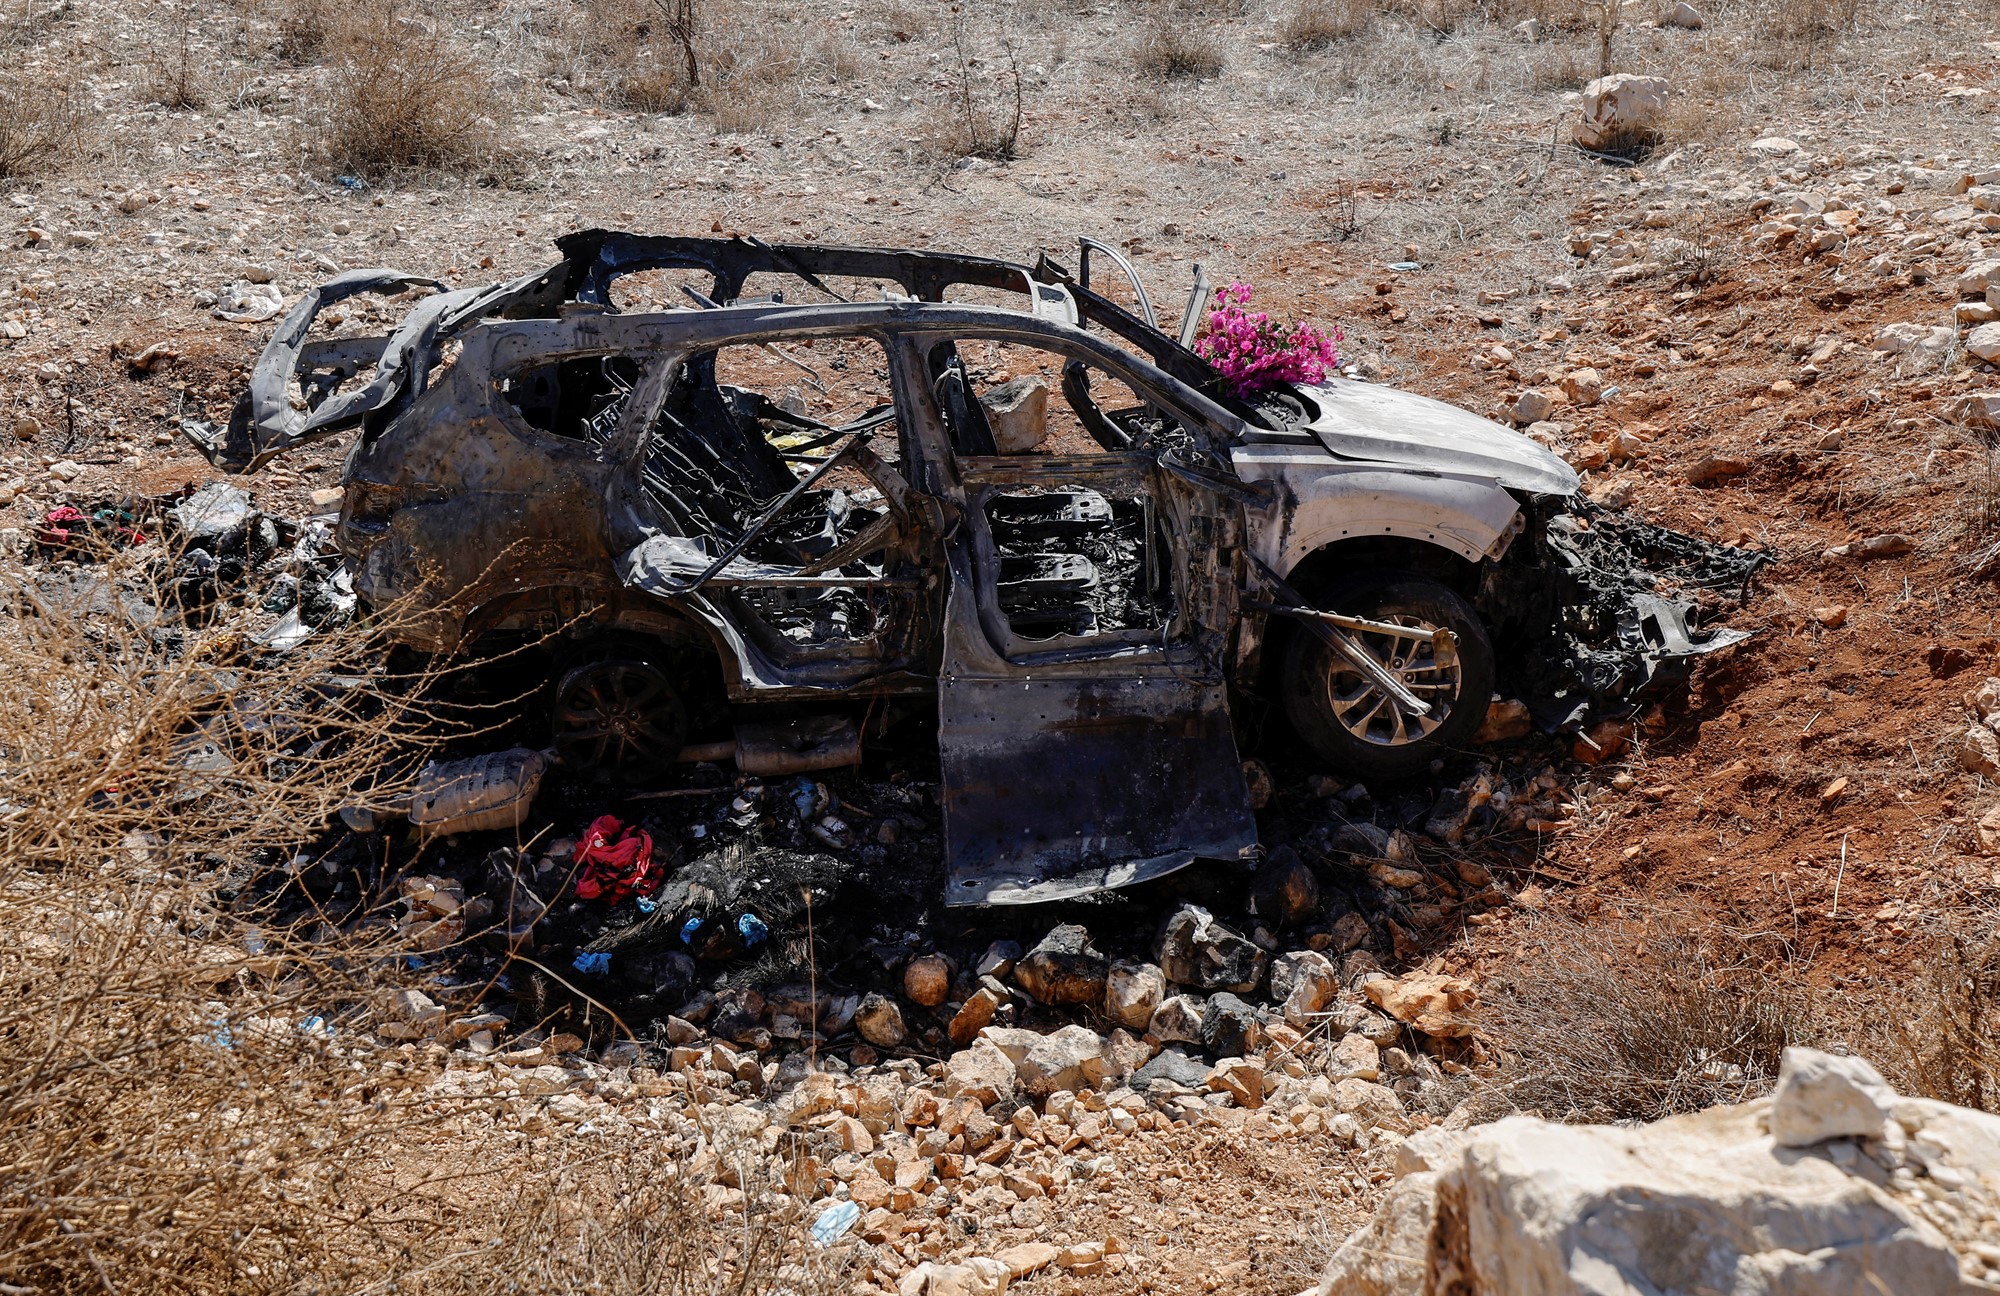 A burnt car wreck in a dry landscape